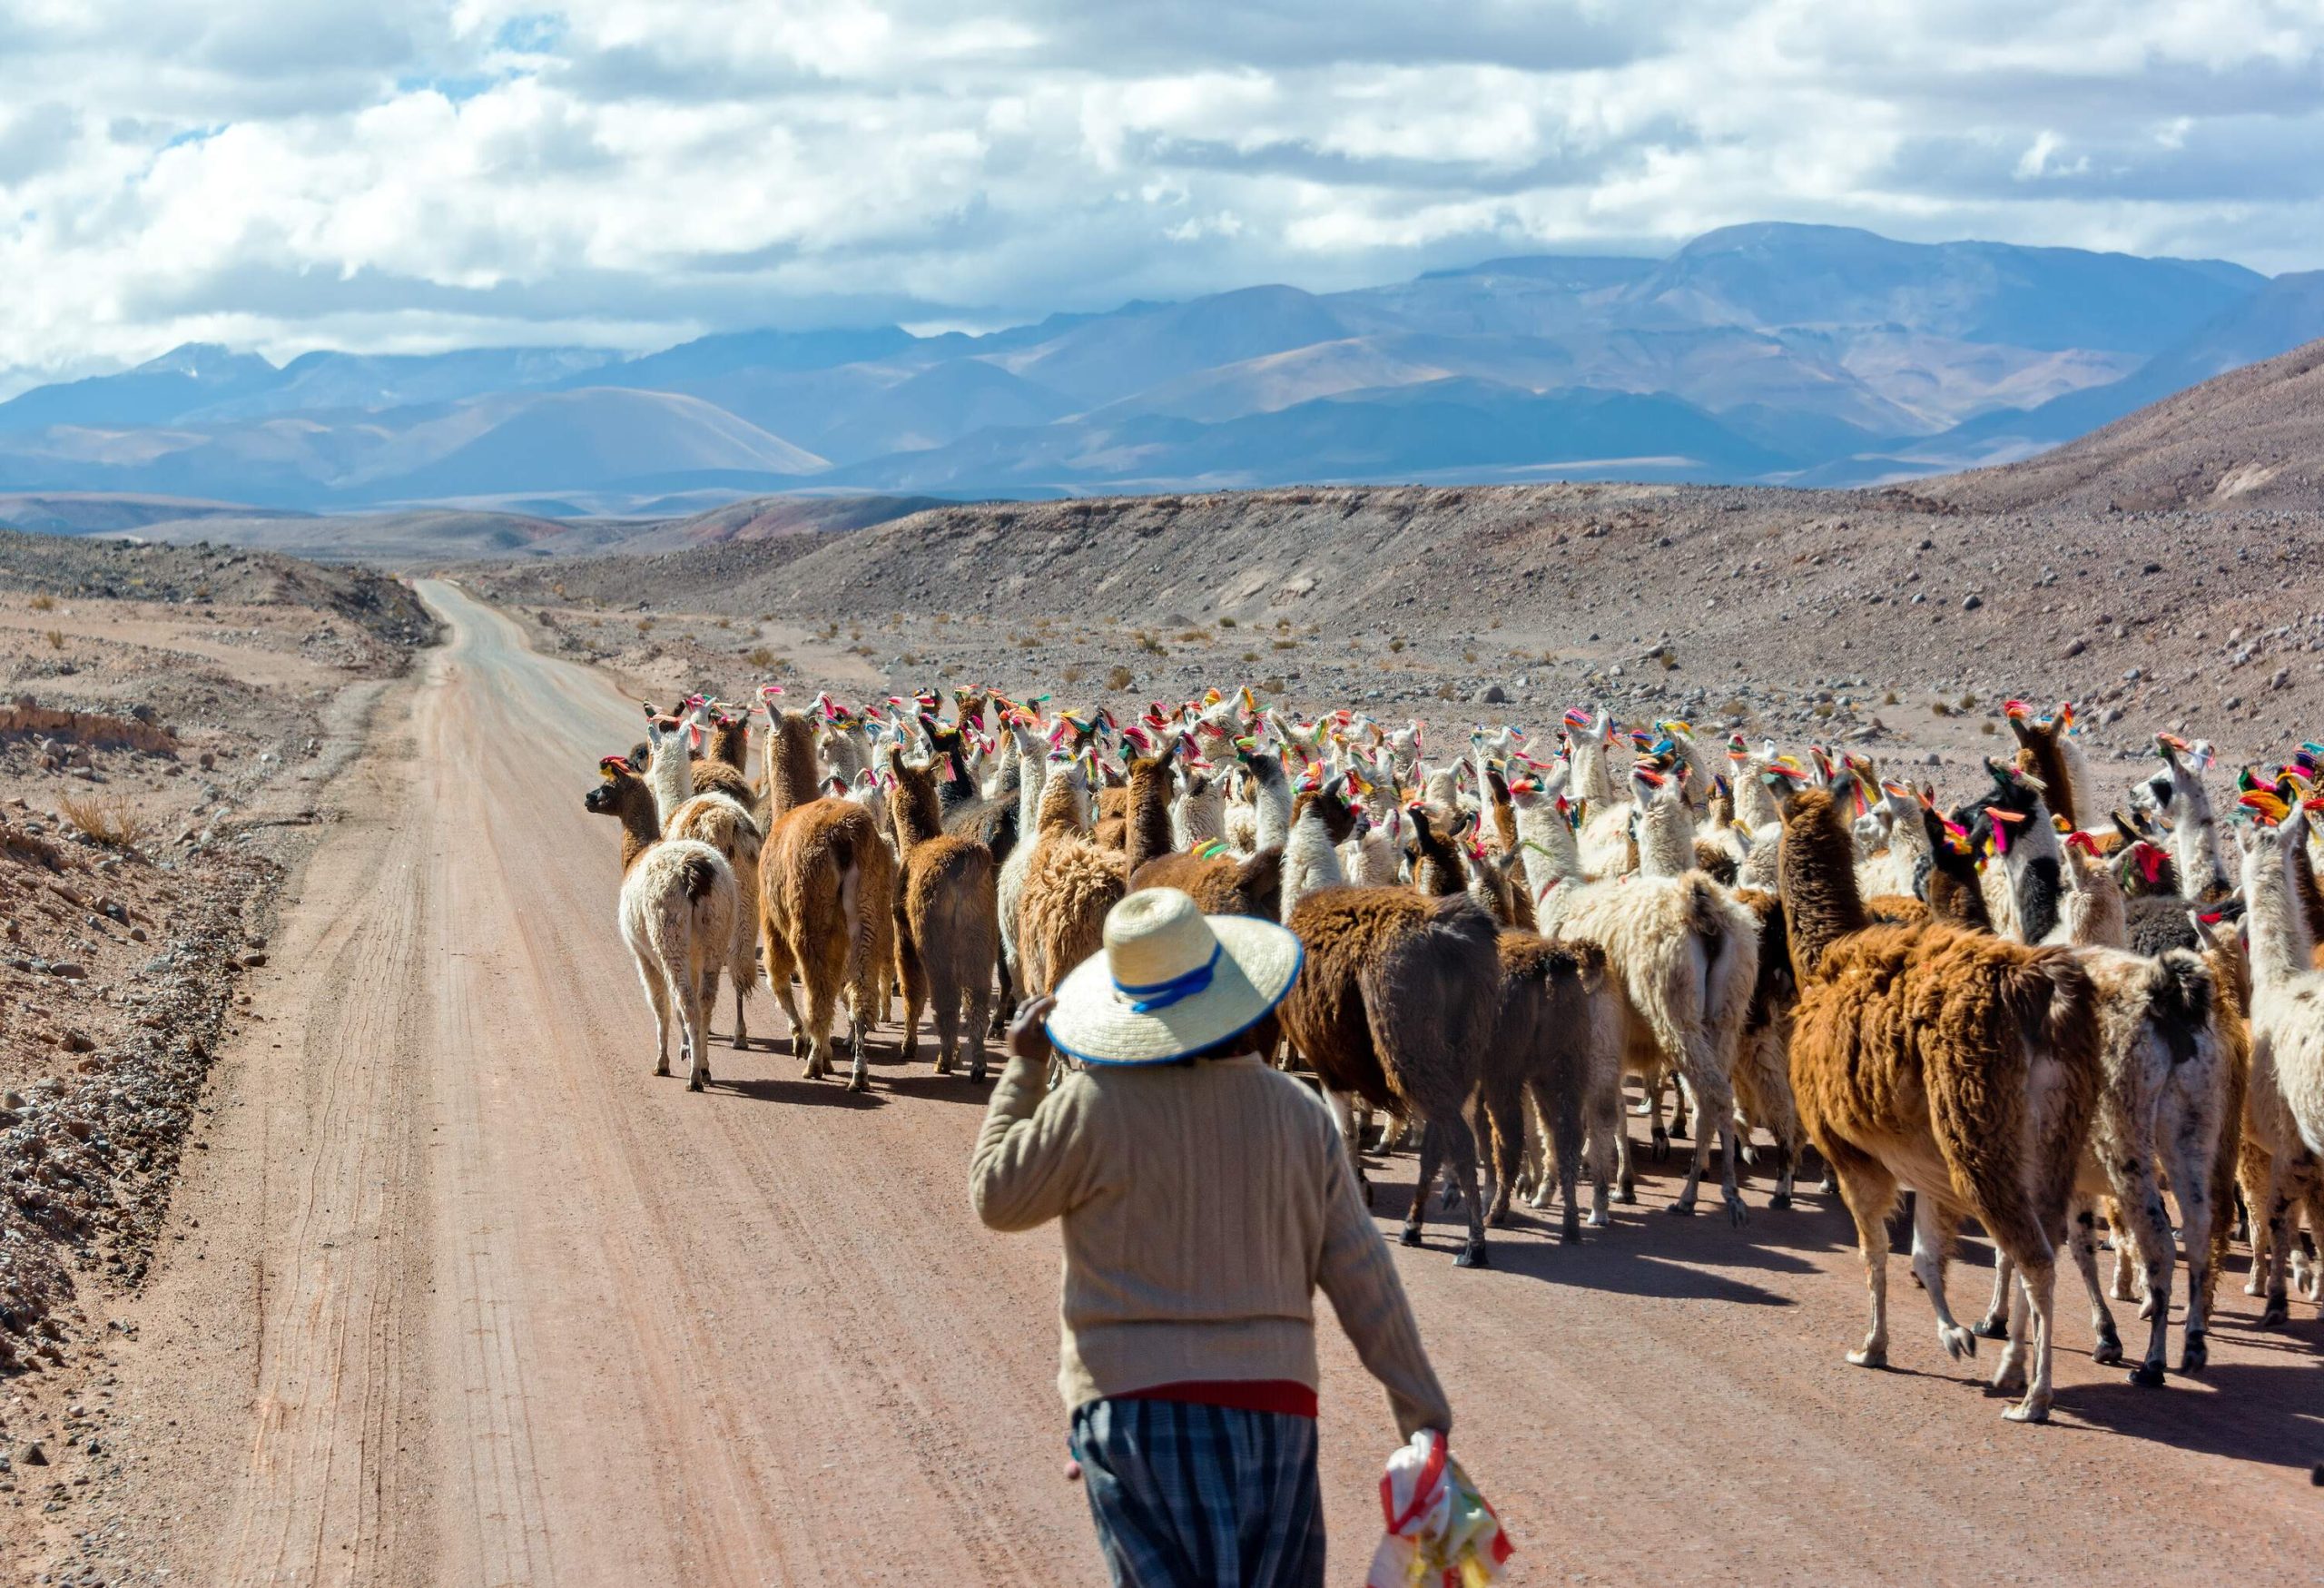 A woman walks behind a herd of llamas on an unpaved road on a deserted rugged land bounded by mountains.